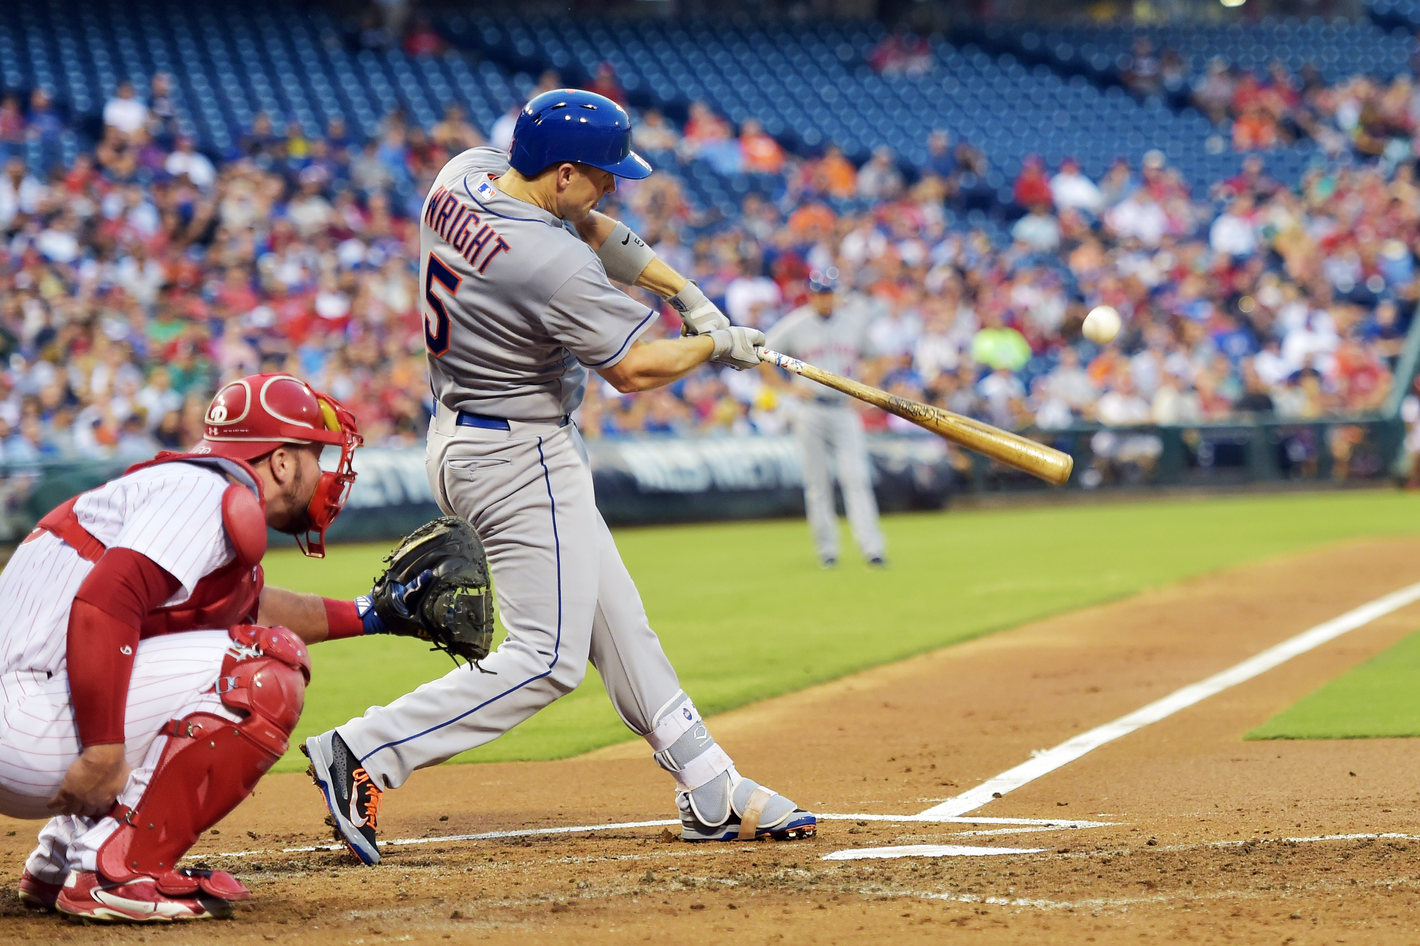 Watch the Mets Blast a Franchise-Record 8 Homers